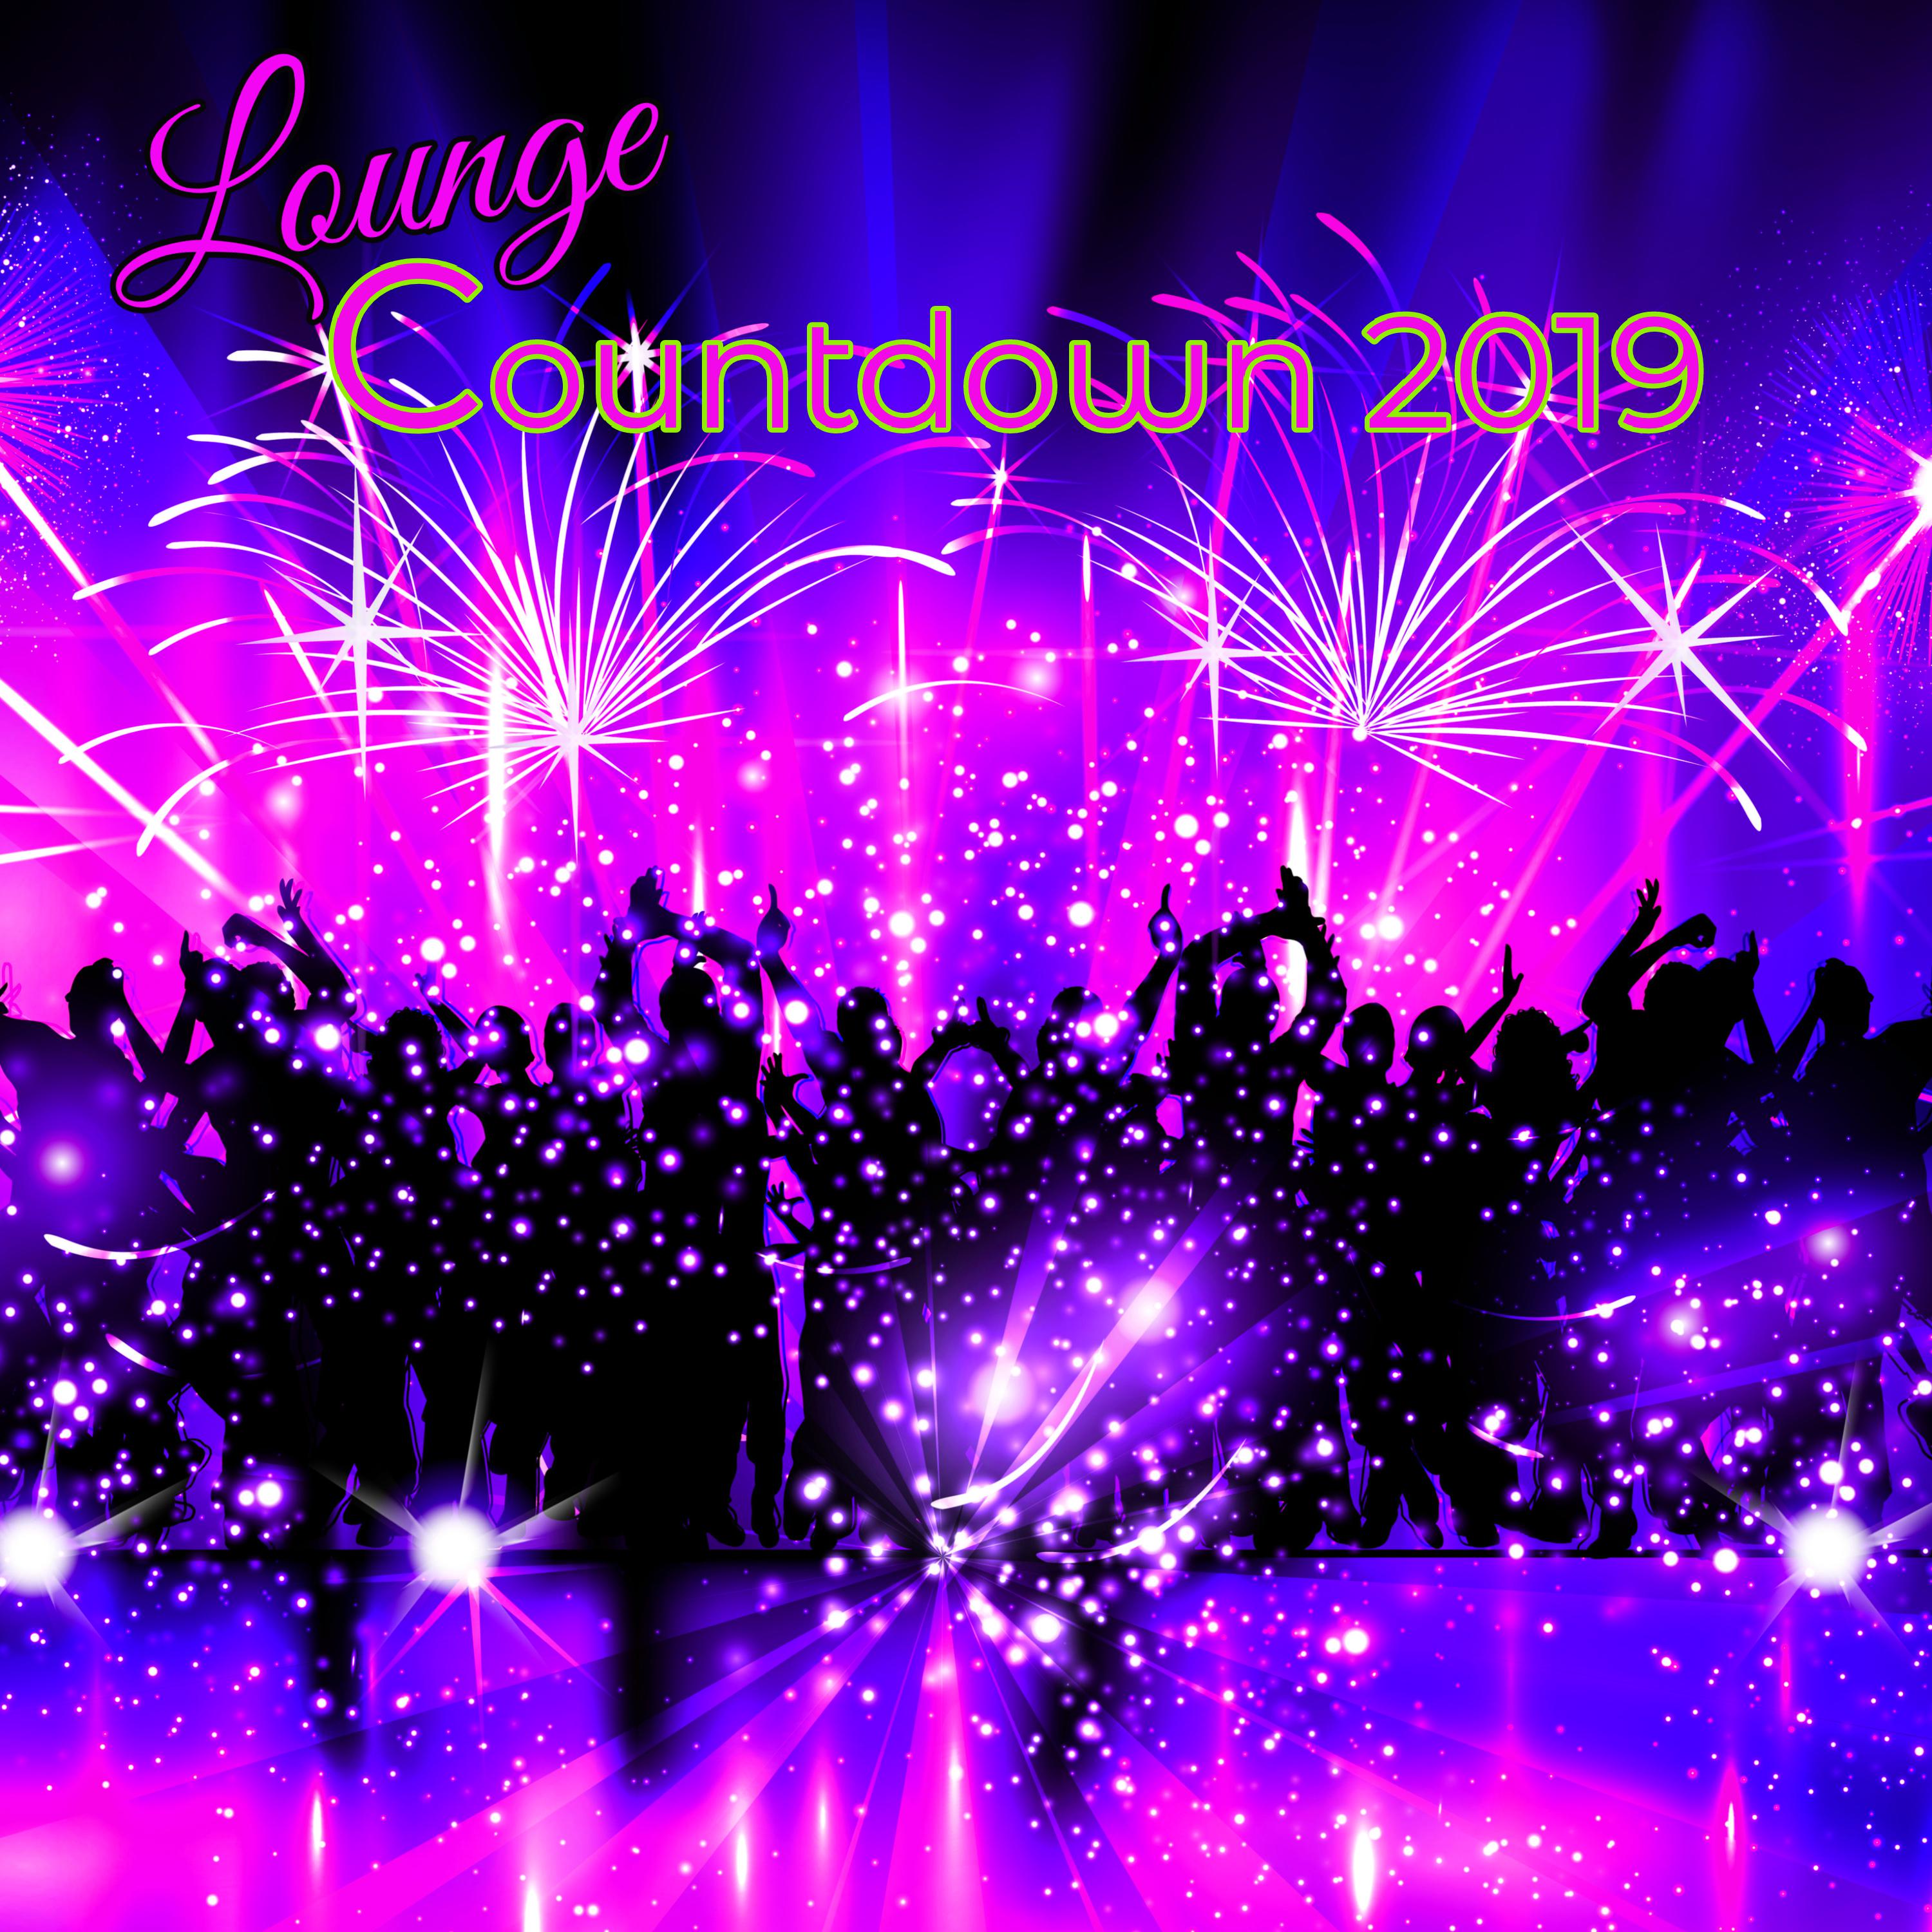 Just Dance - Countdown to New Year 2019